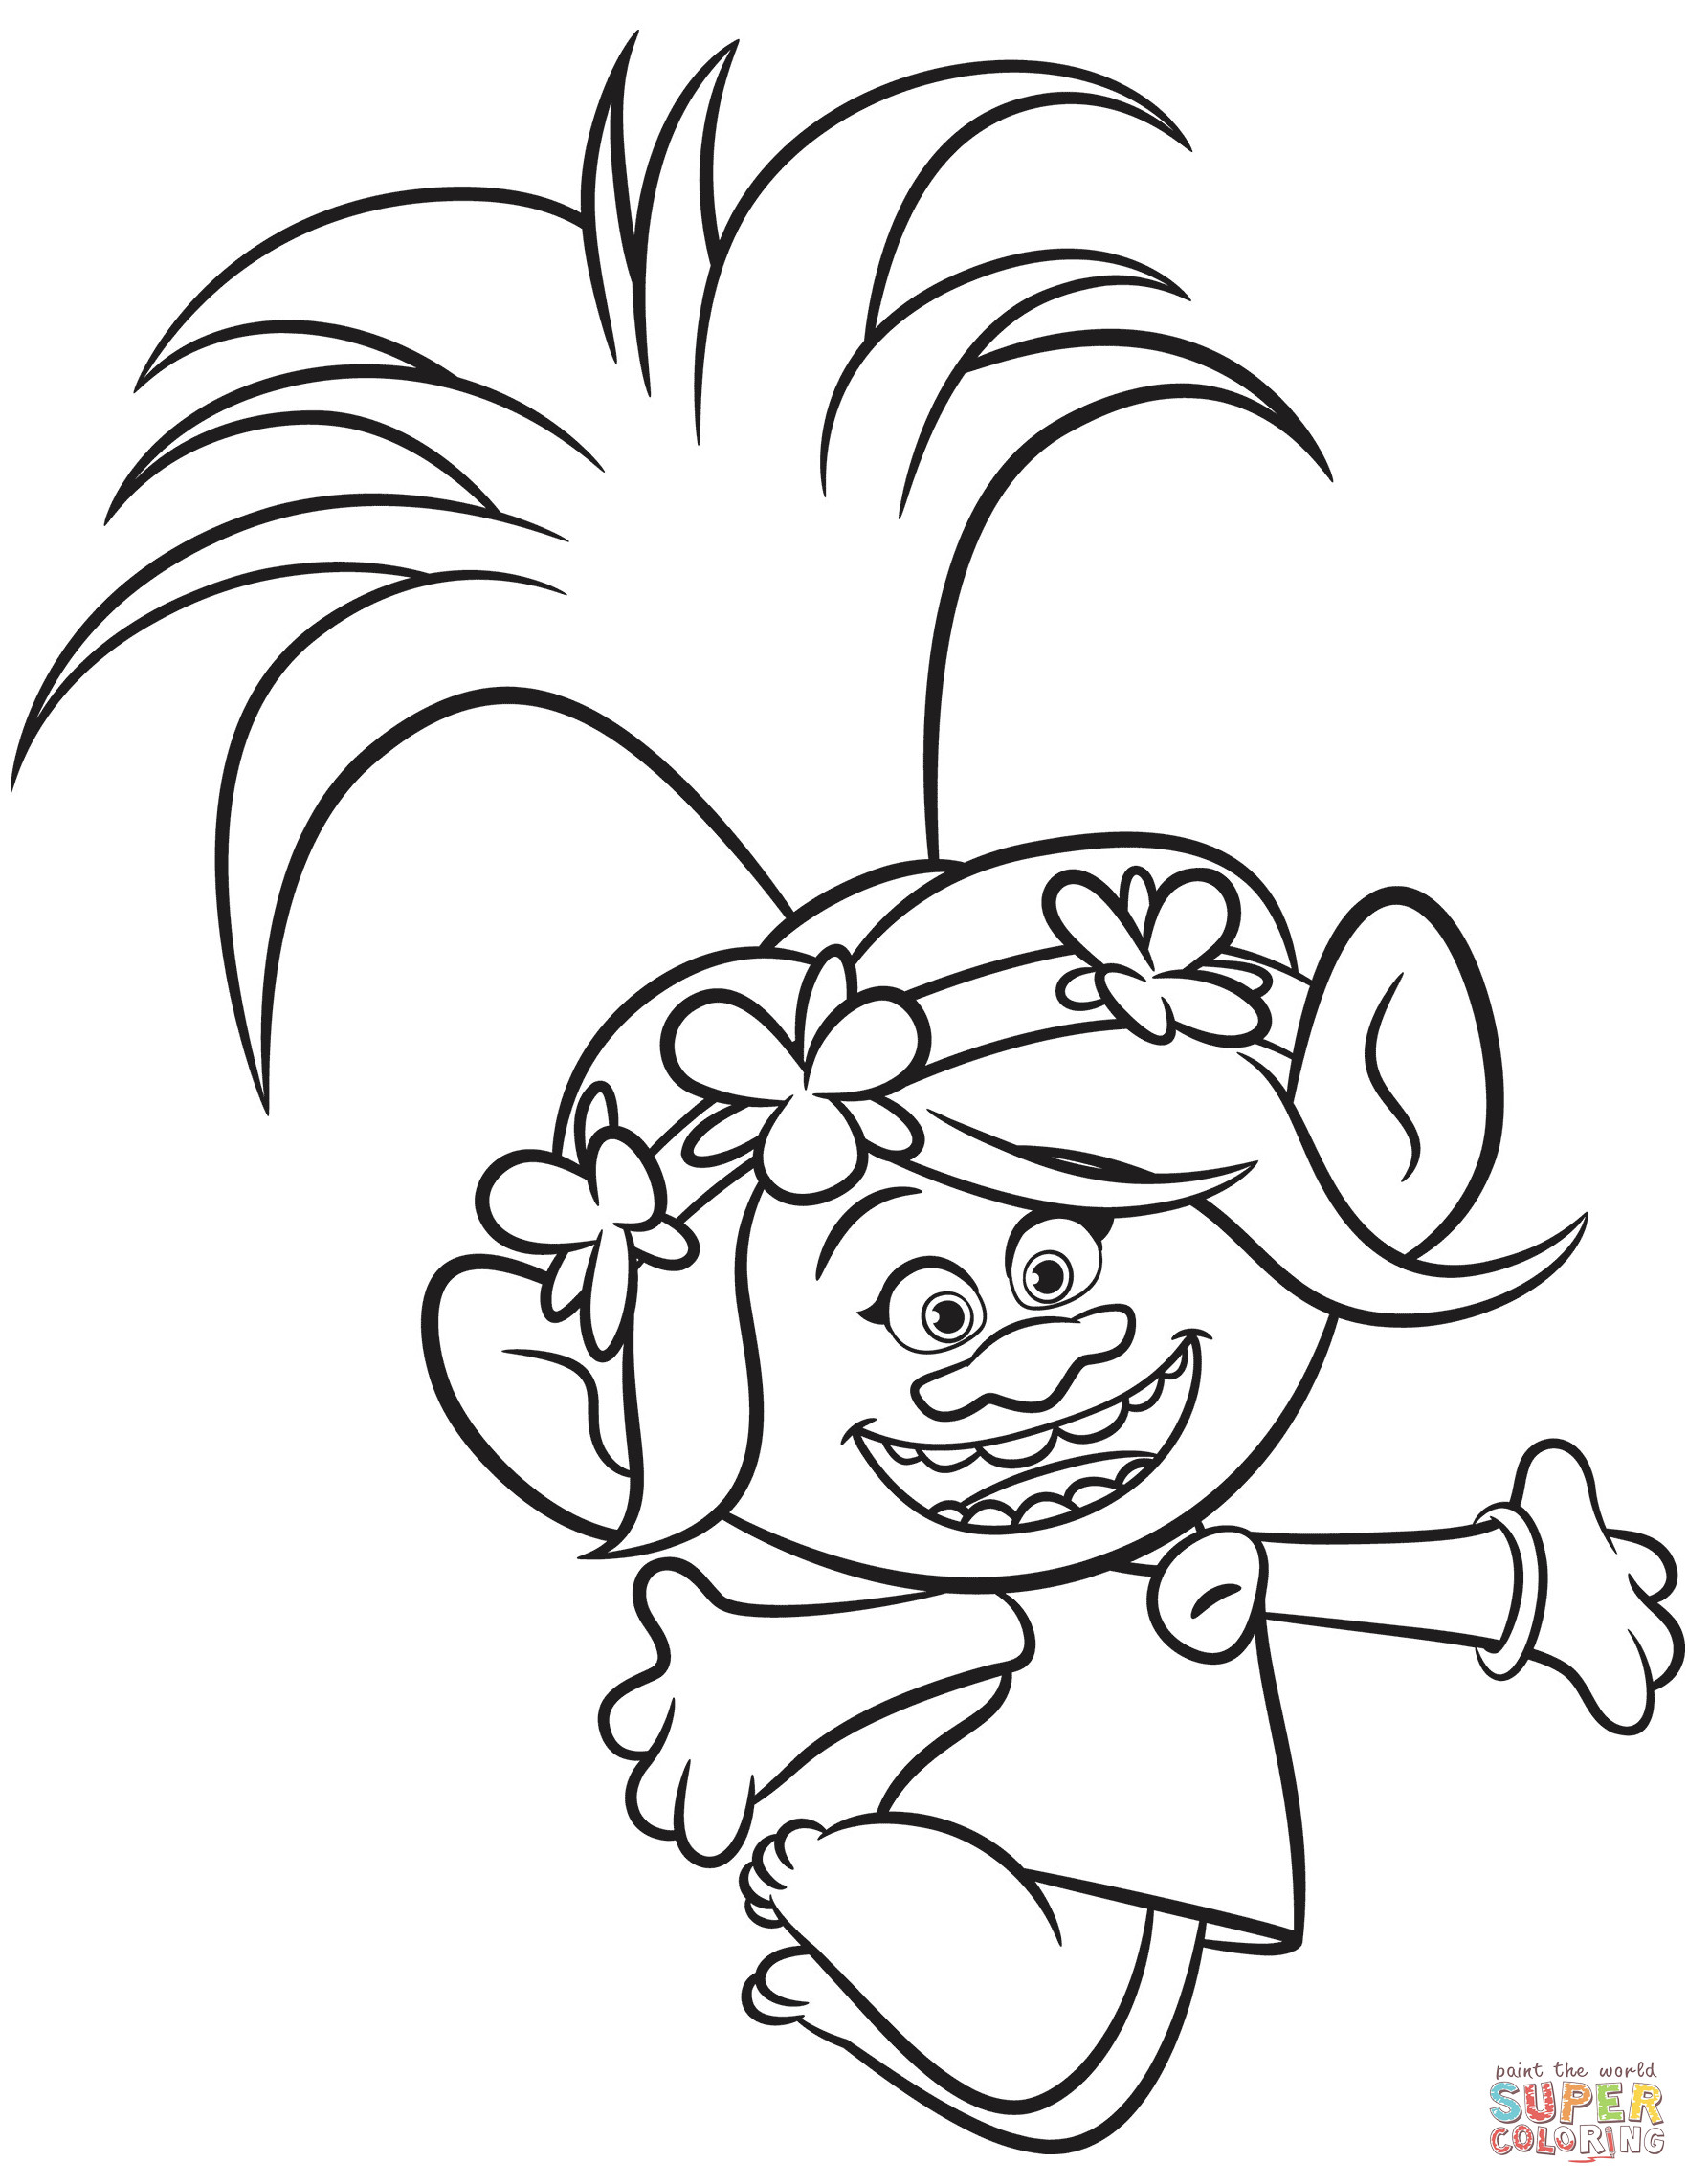 Coloring Pages Trolls
 Poppy from Trolls coloring page